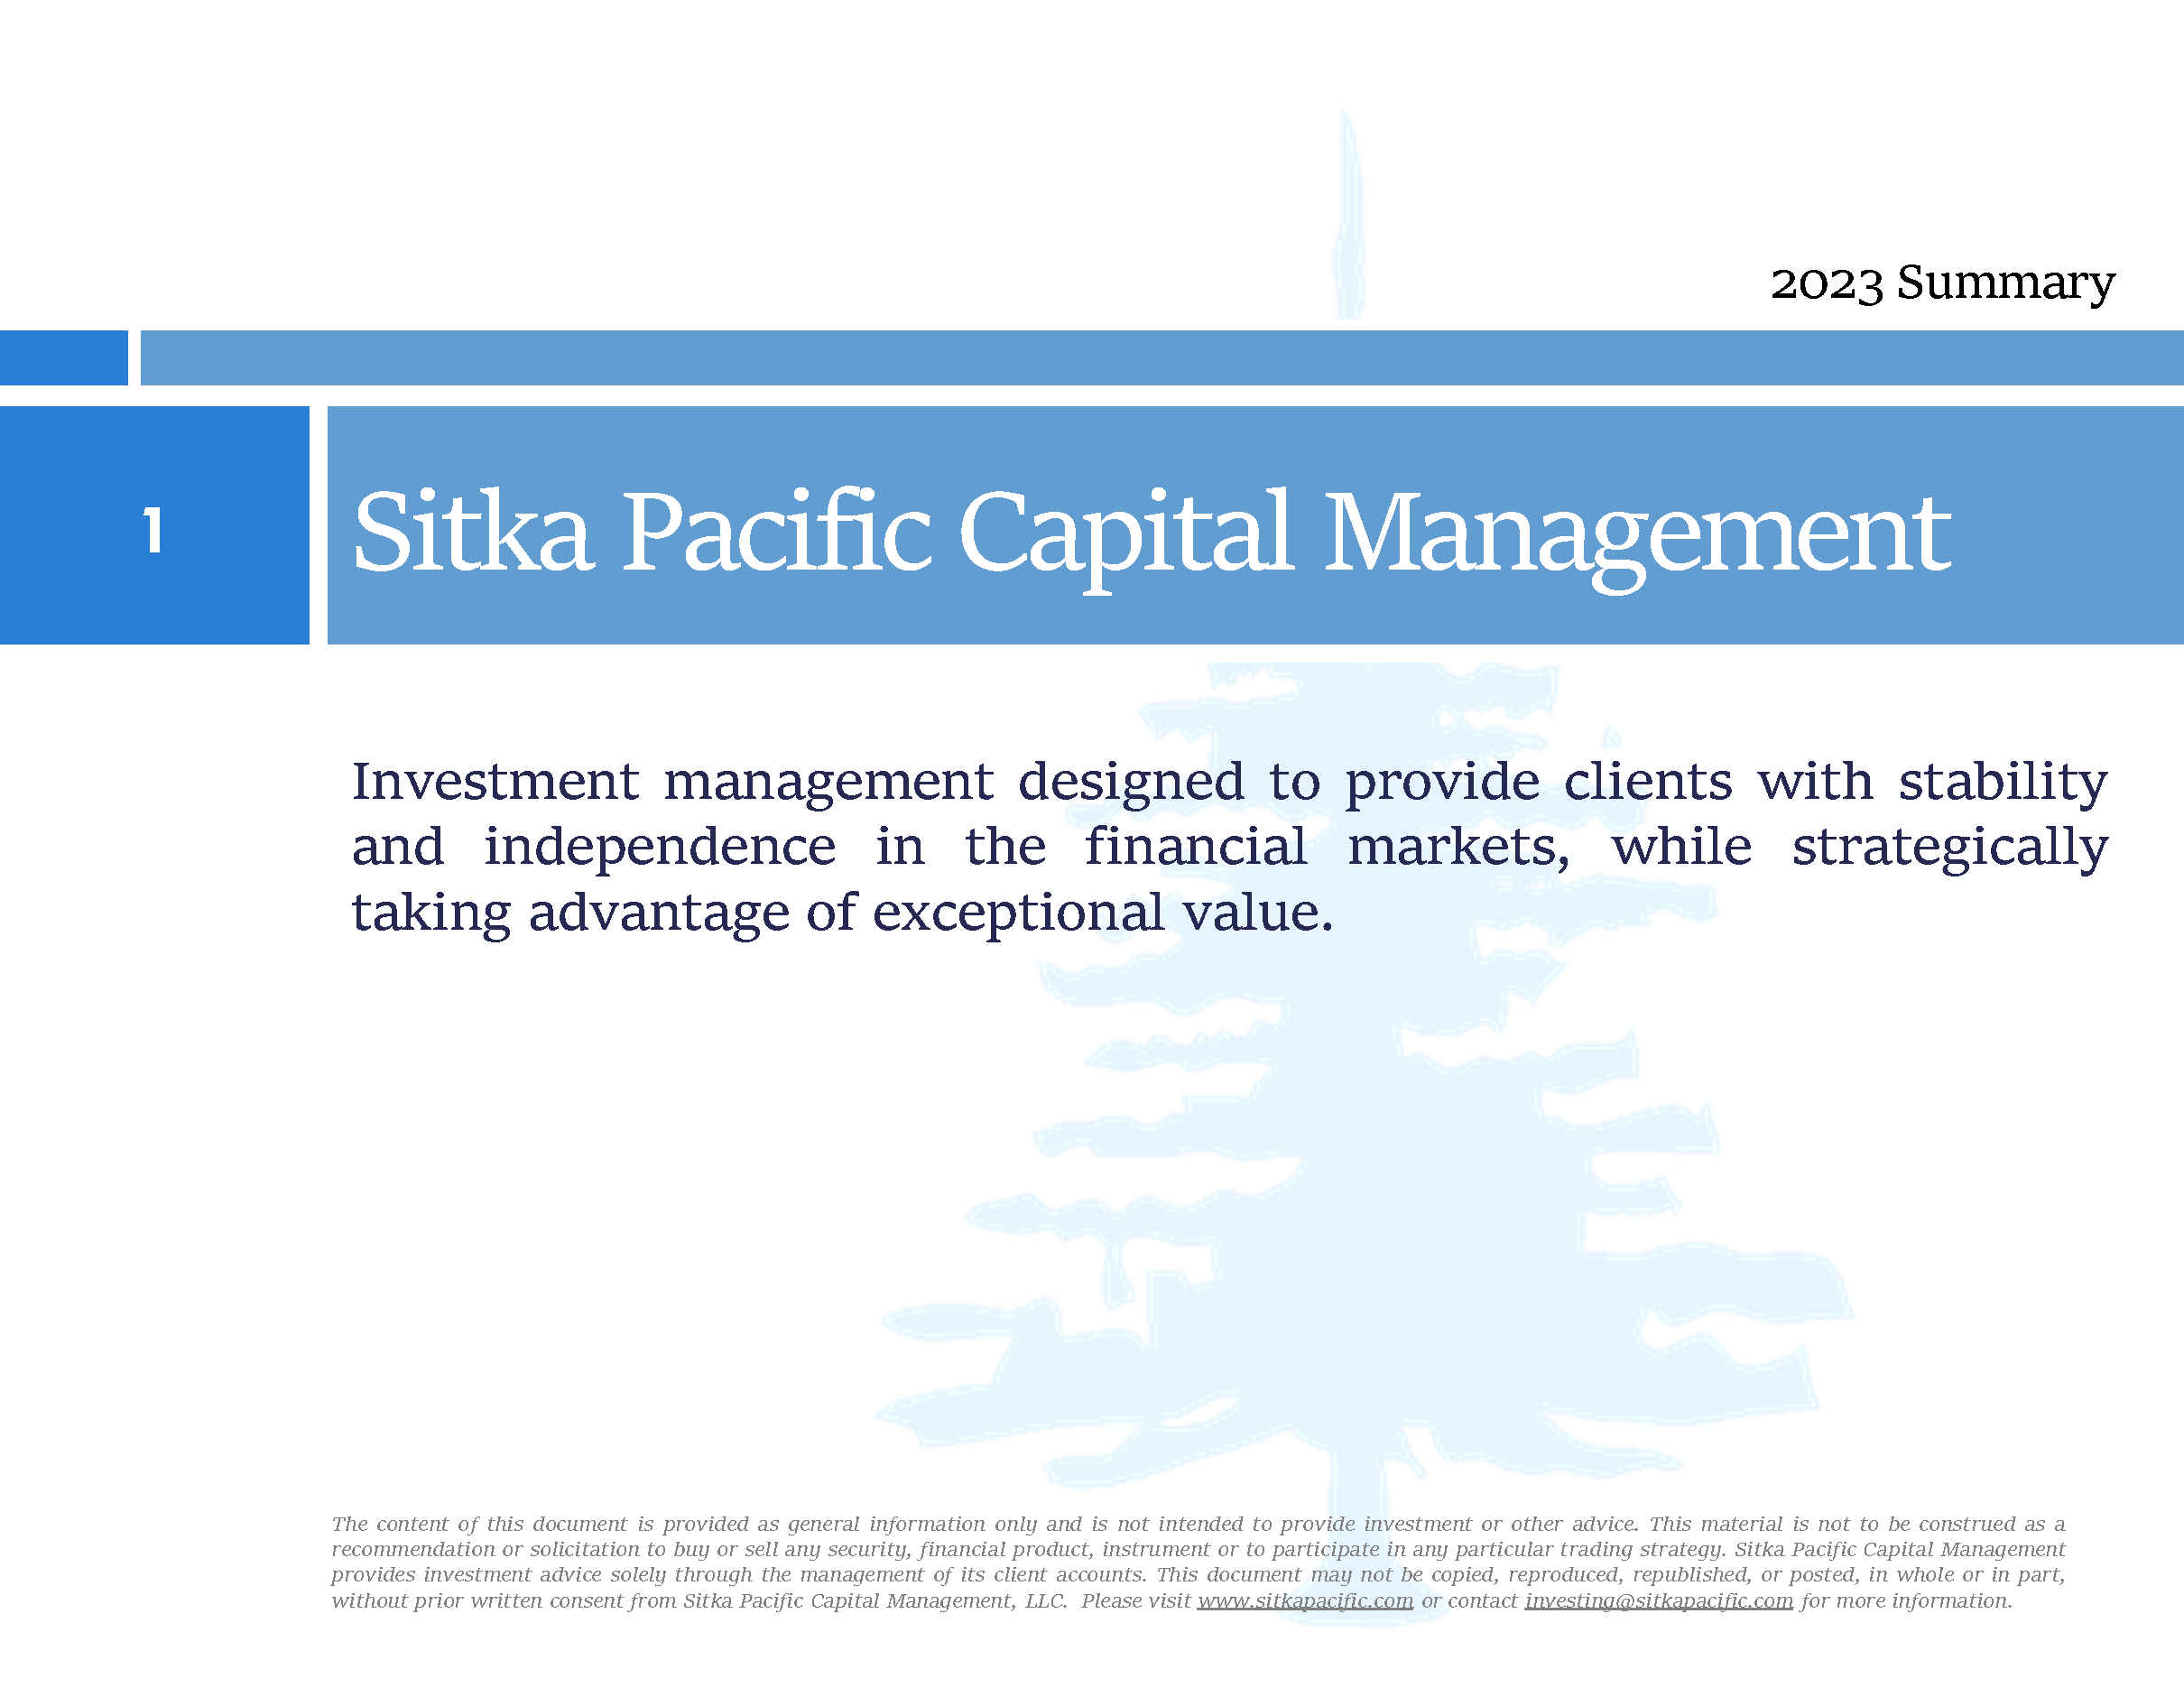 Sitka Pacific Capital Management 2023 Summary